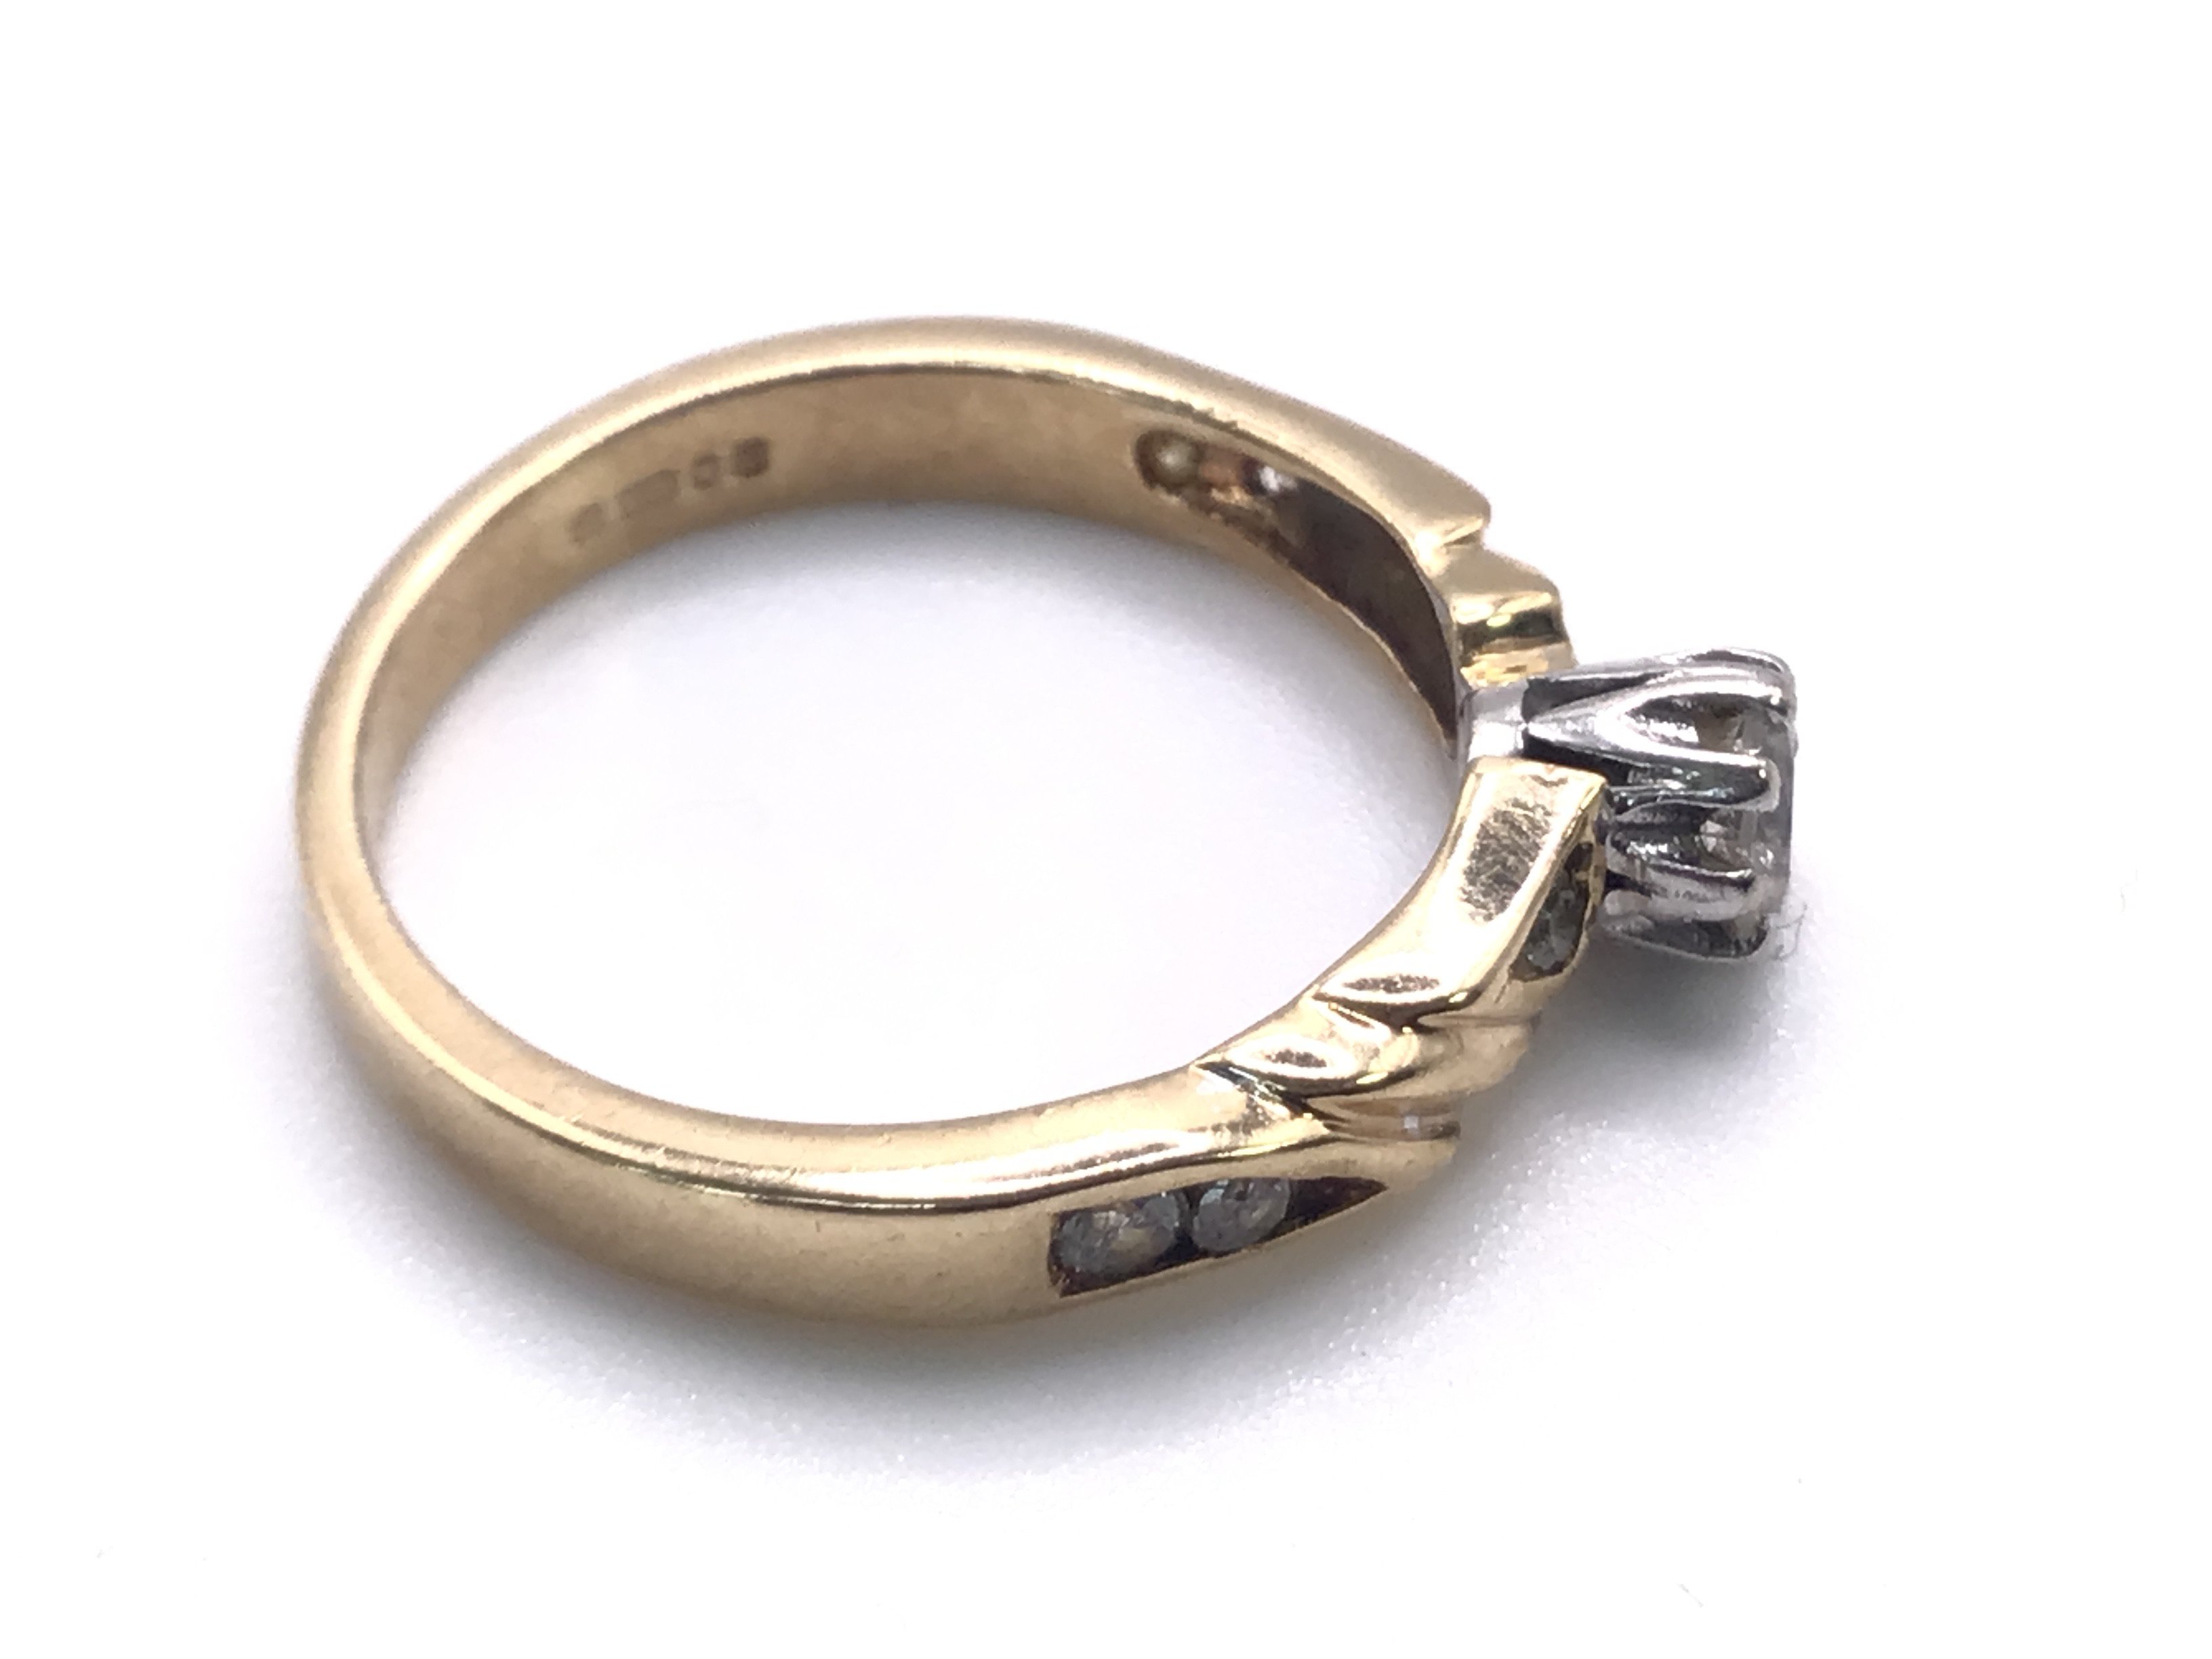 A 9 Ct Gold Dimond Solitaire with Diamonds on Band - Image 3 of 4